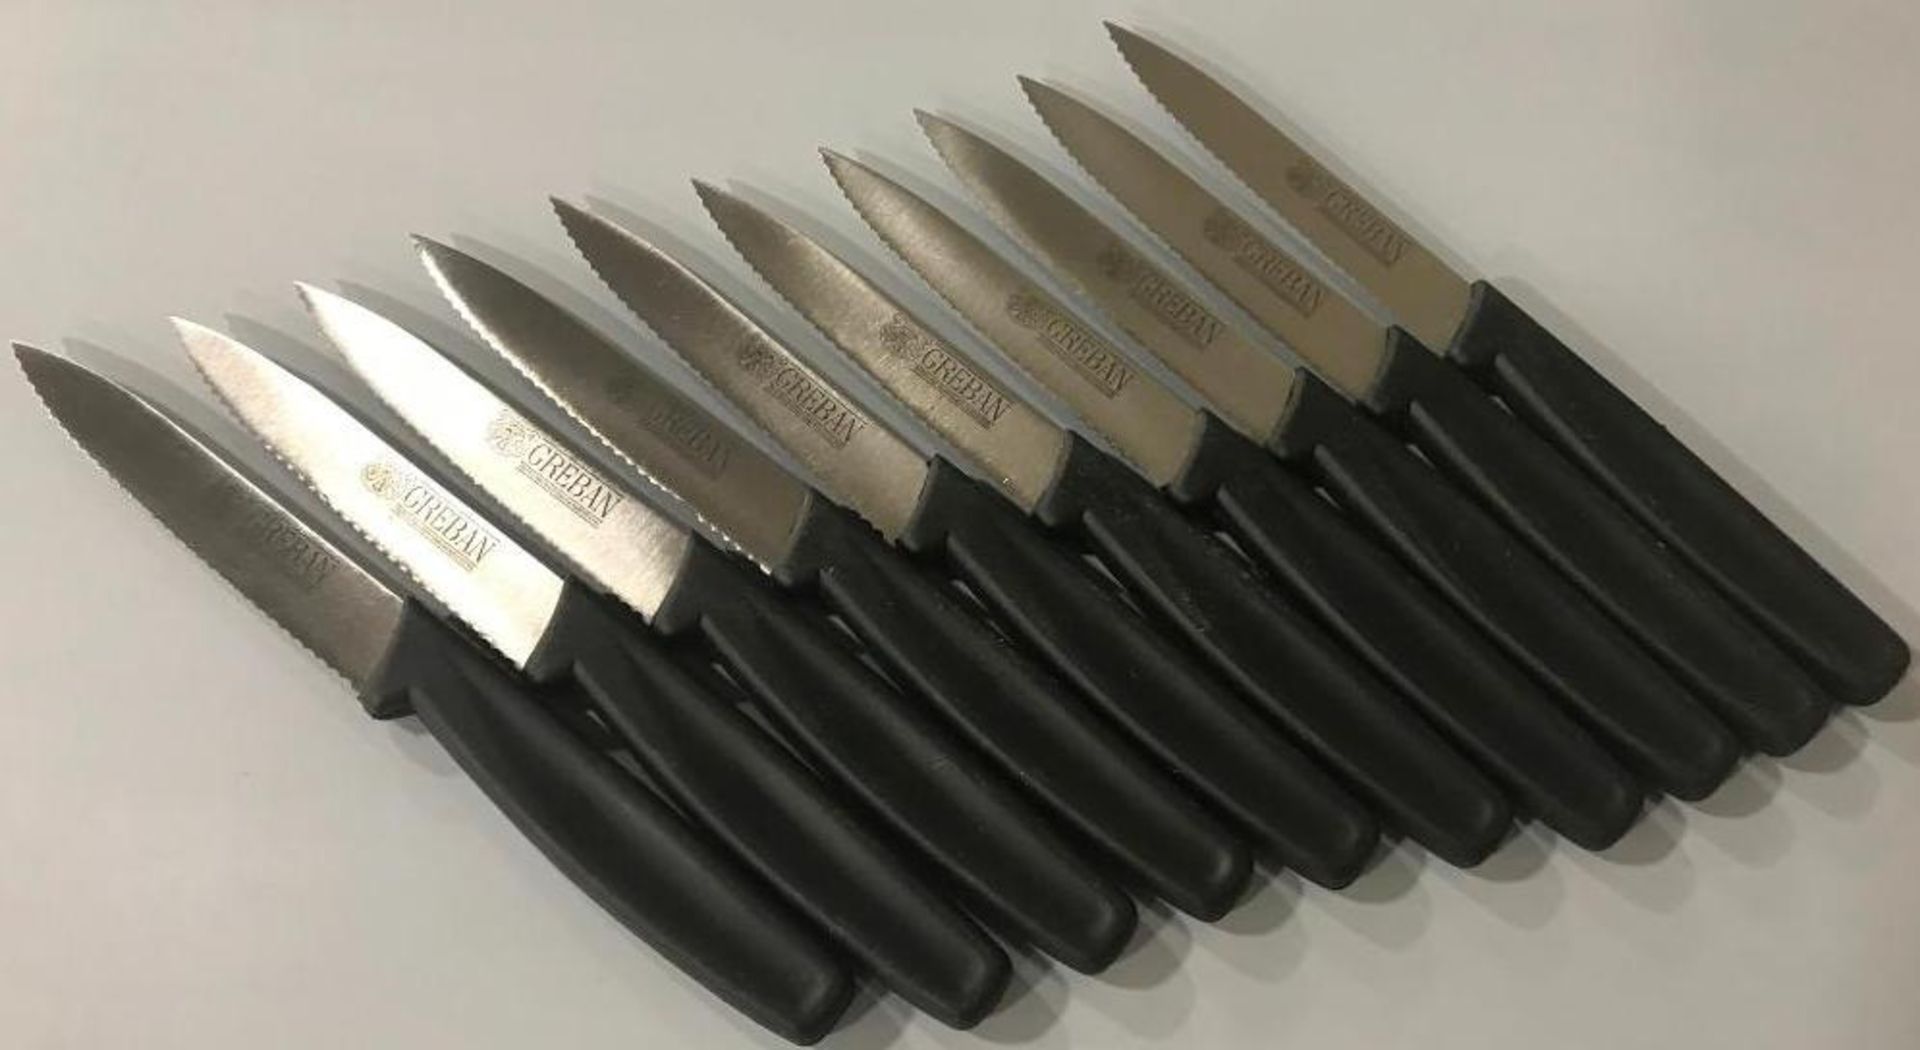 OMCAN 4" WAVE EDGE PARING KNIVES W/BLACK POLY HANDLE - LOT OF 10 - NEW - Image 3 of 3